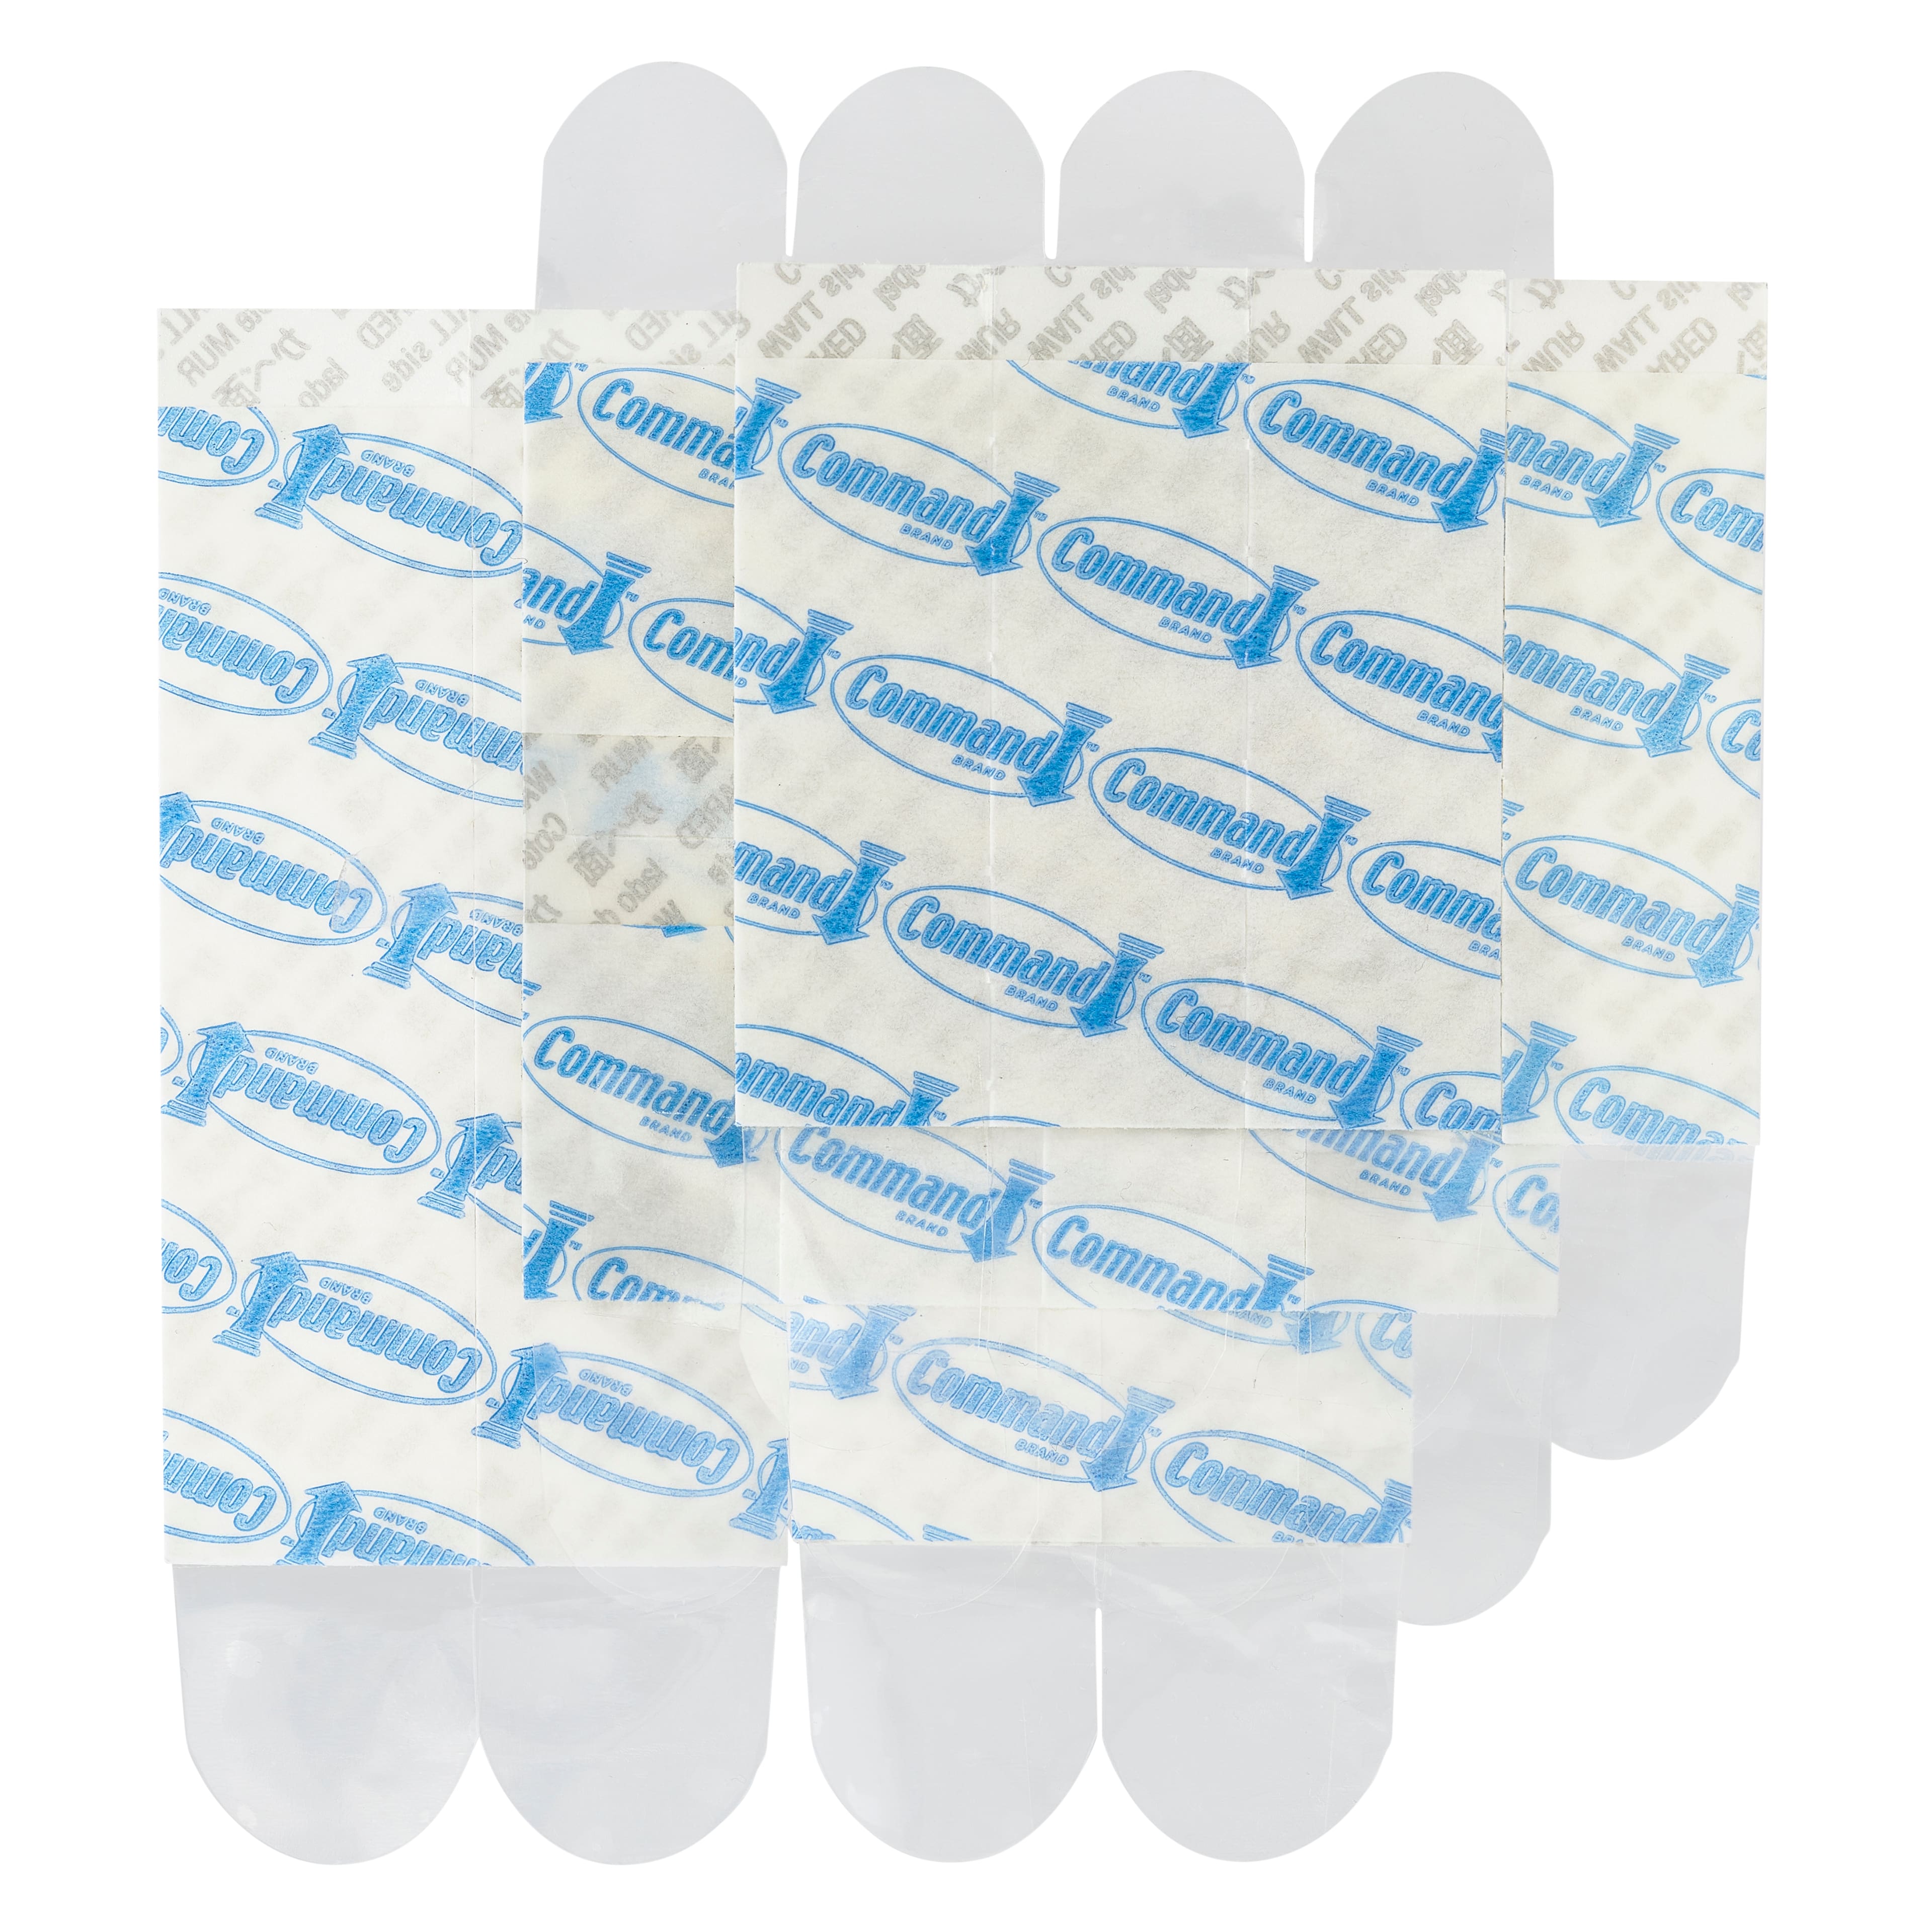 Command .5 lb. - 1 lb. Small Clear Refill Strips (16 Strips) 17022CLR-16ES  - The Home Depot